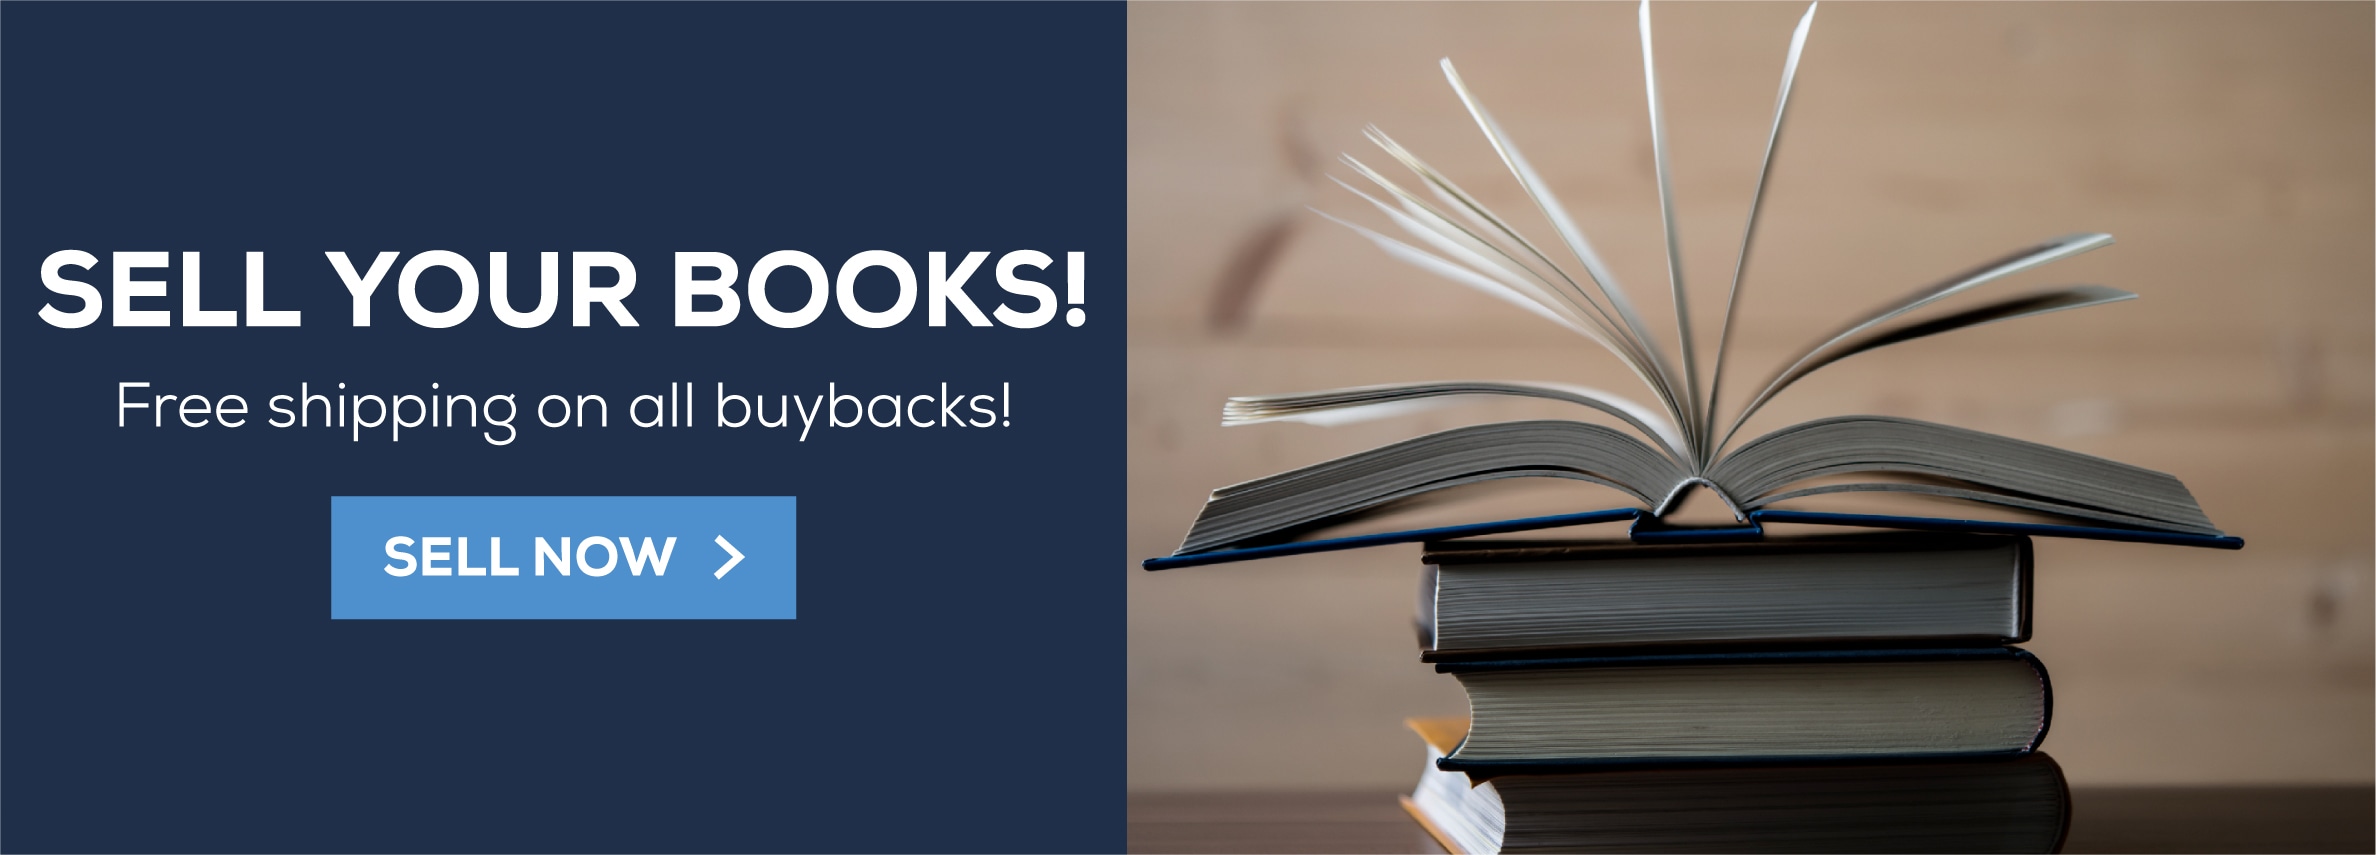 Sell your books! Free shipping on all buybacks! Sell now.